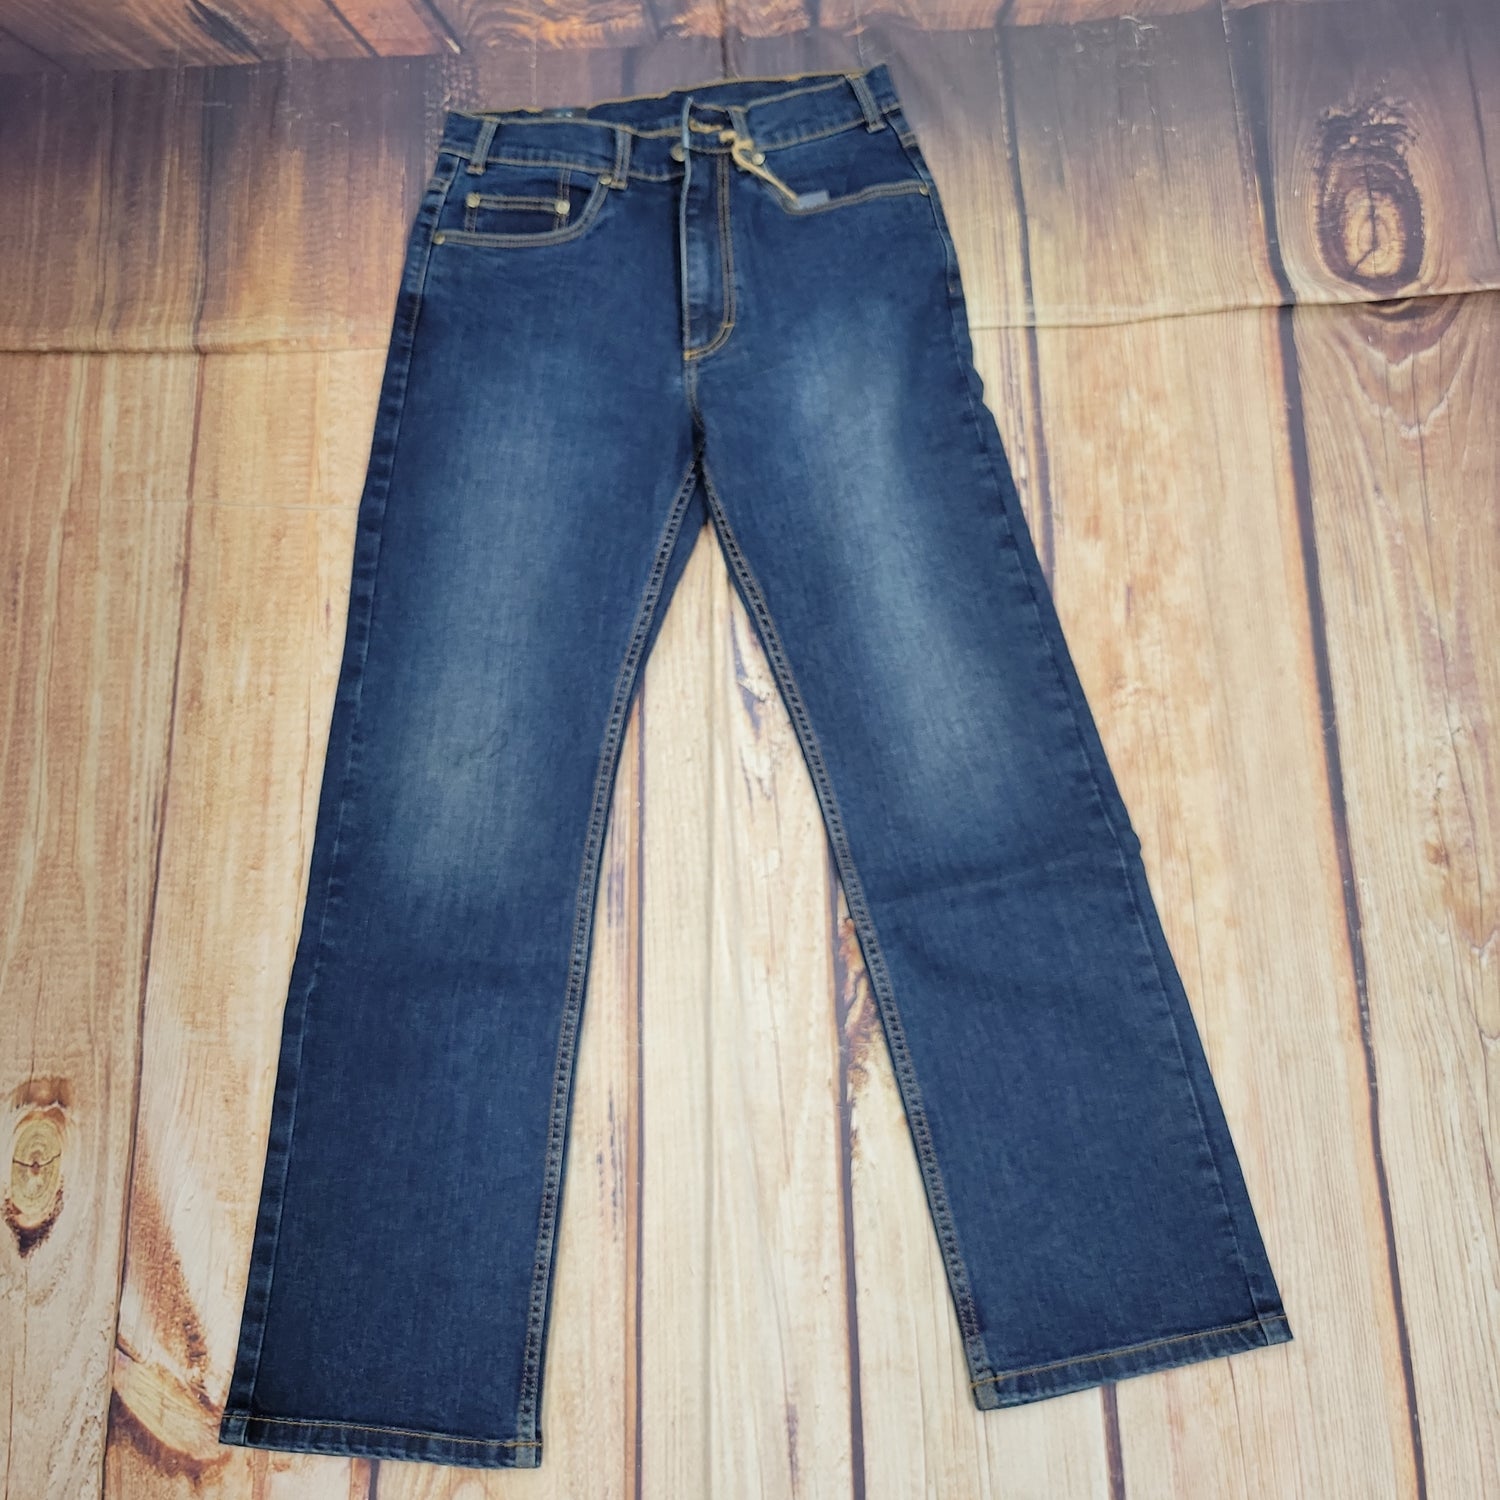 GRAND RIVER JEANS